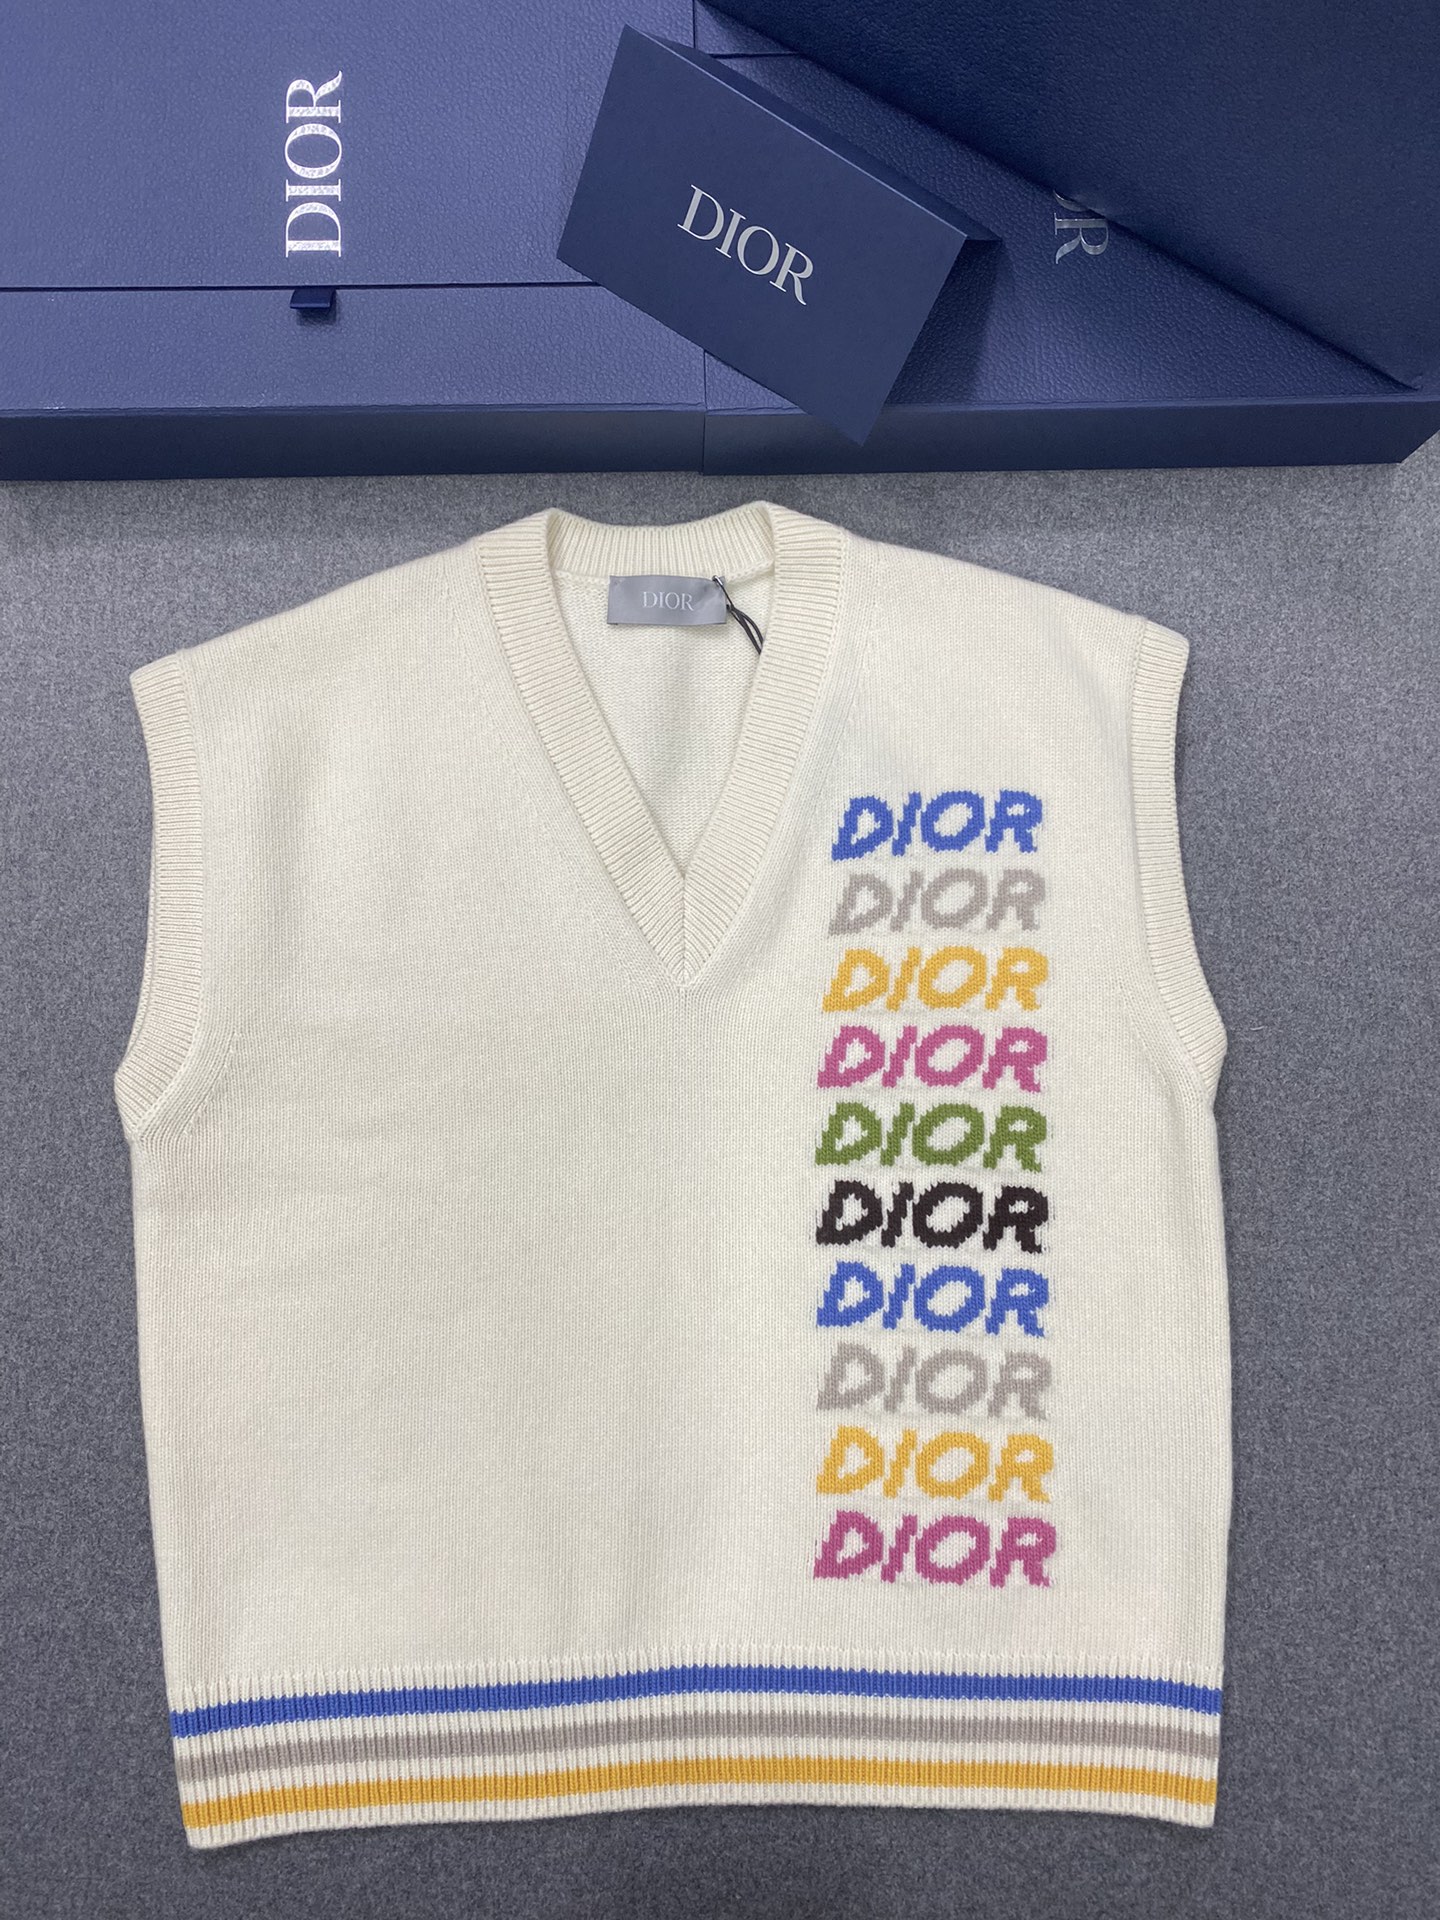 Dior Replica
 Clothing Tank Tops&Camis Cashmere Knitting Wool Spring Collection Fashion Long Sleeve